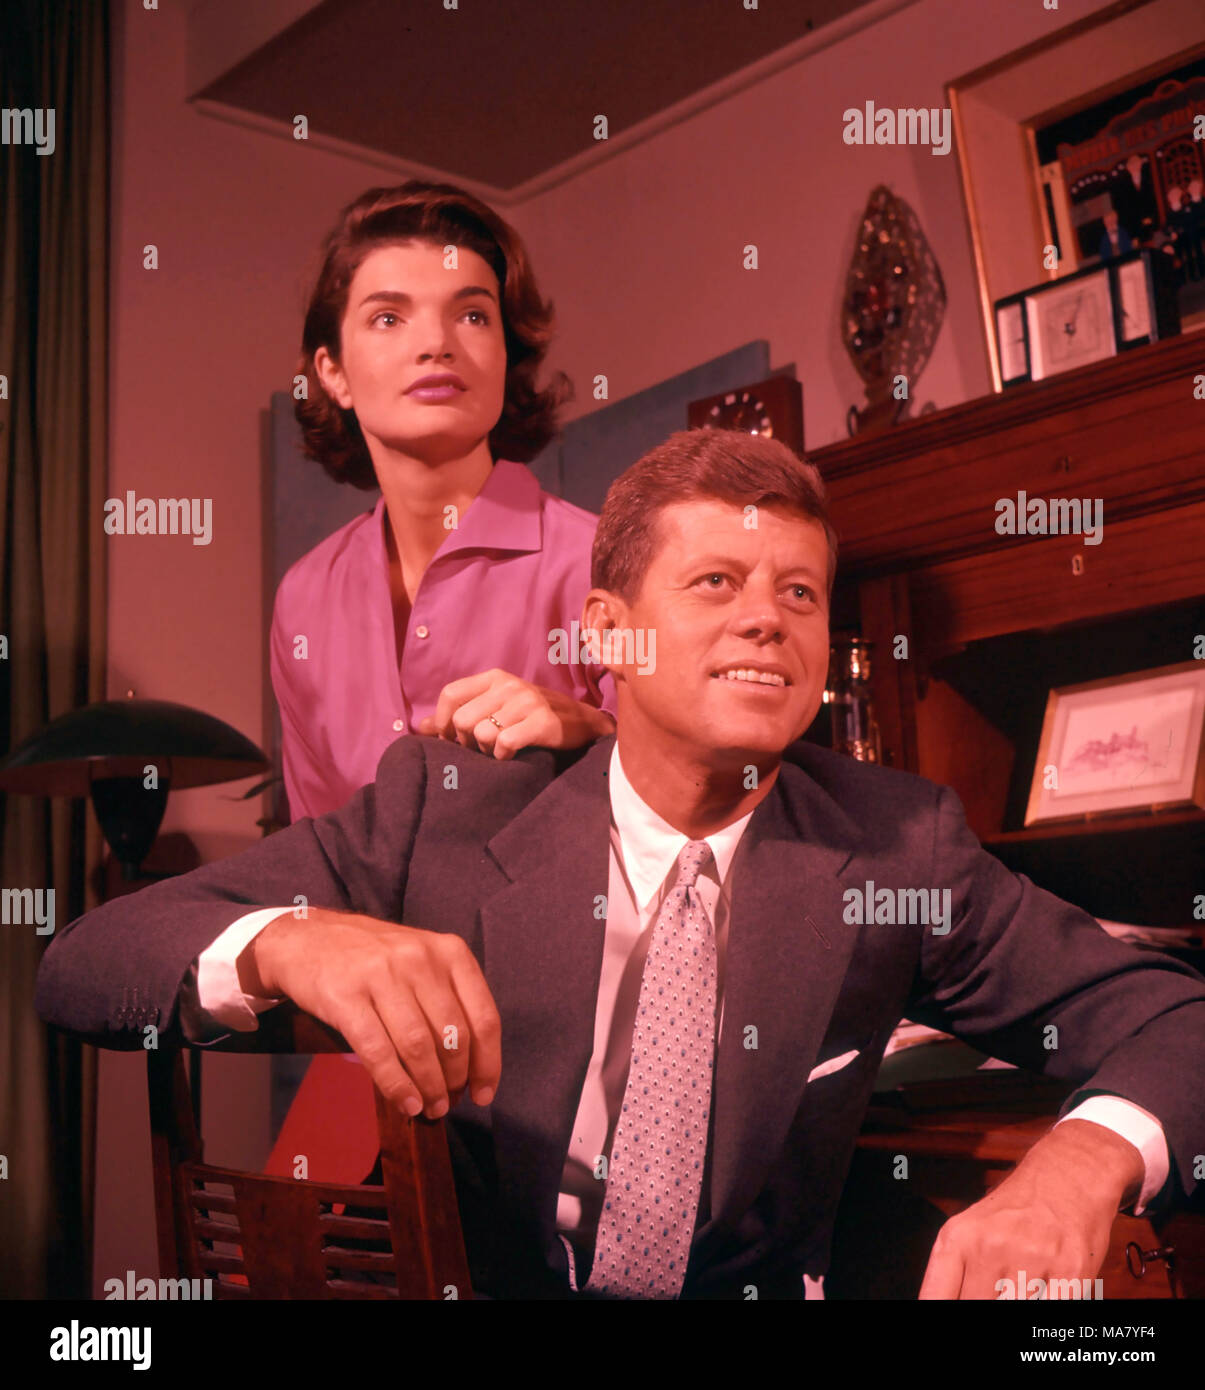 JOHN F. KENNEDY (1917-1963) As US President about 1963 with his wife Jackie Stock Photo